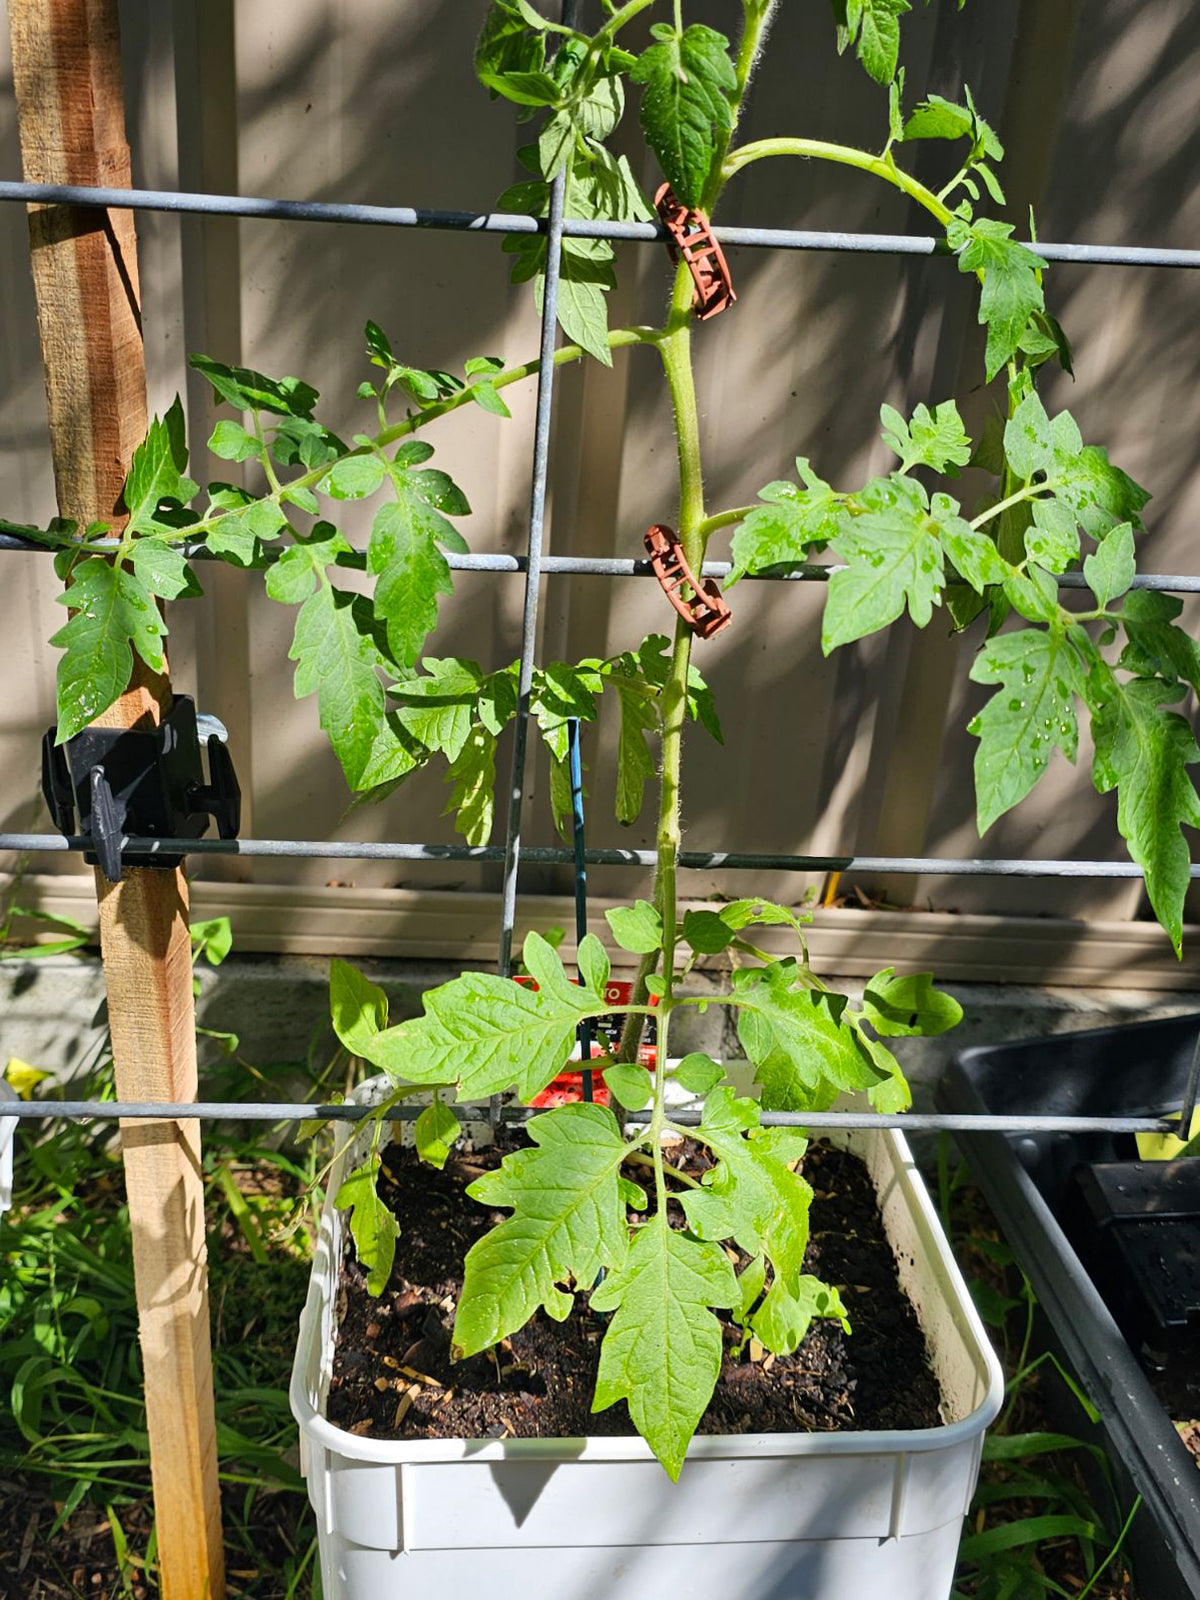 ClipTys -  The quick and easy way to secure your plants. Perfect for your tomatoes!